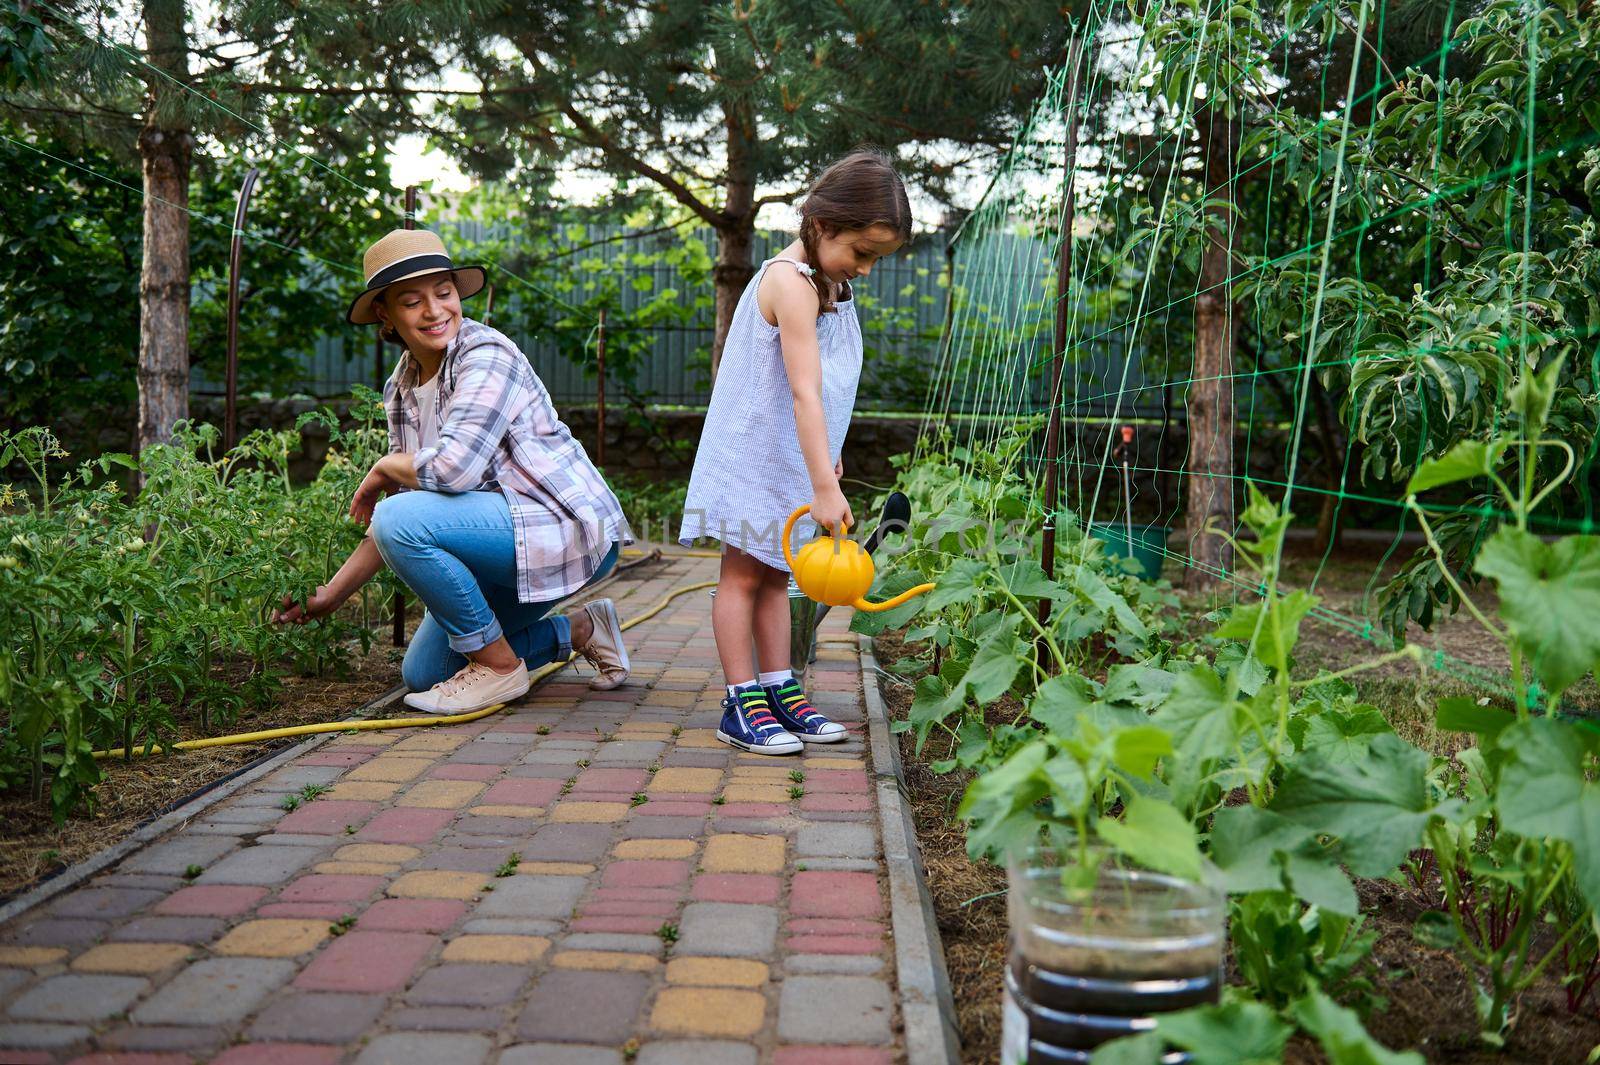 Mom and daughter are gardening at the family eco-farm. Raise love and care for nature and the planet from childhood. Cute little girl watering cucumbers in a flower bed, helping her mom in farming